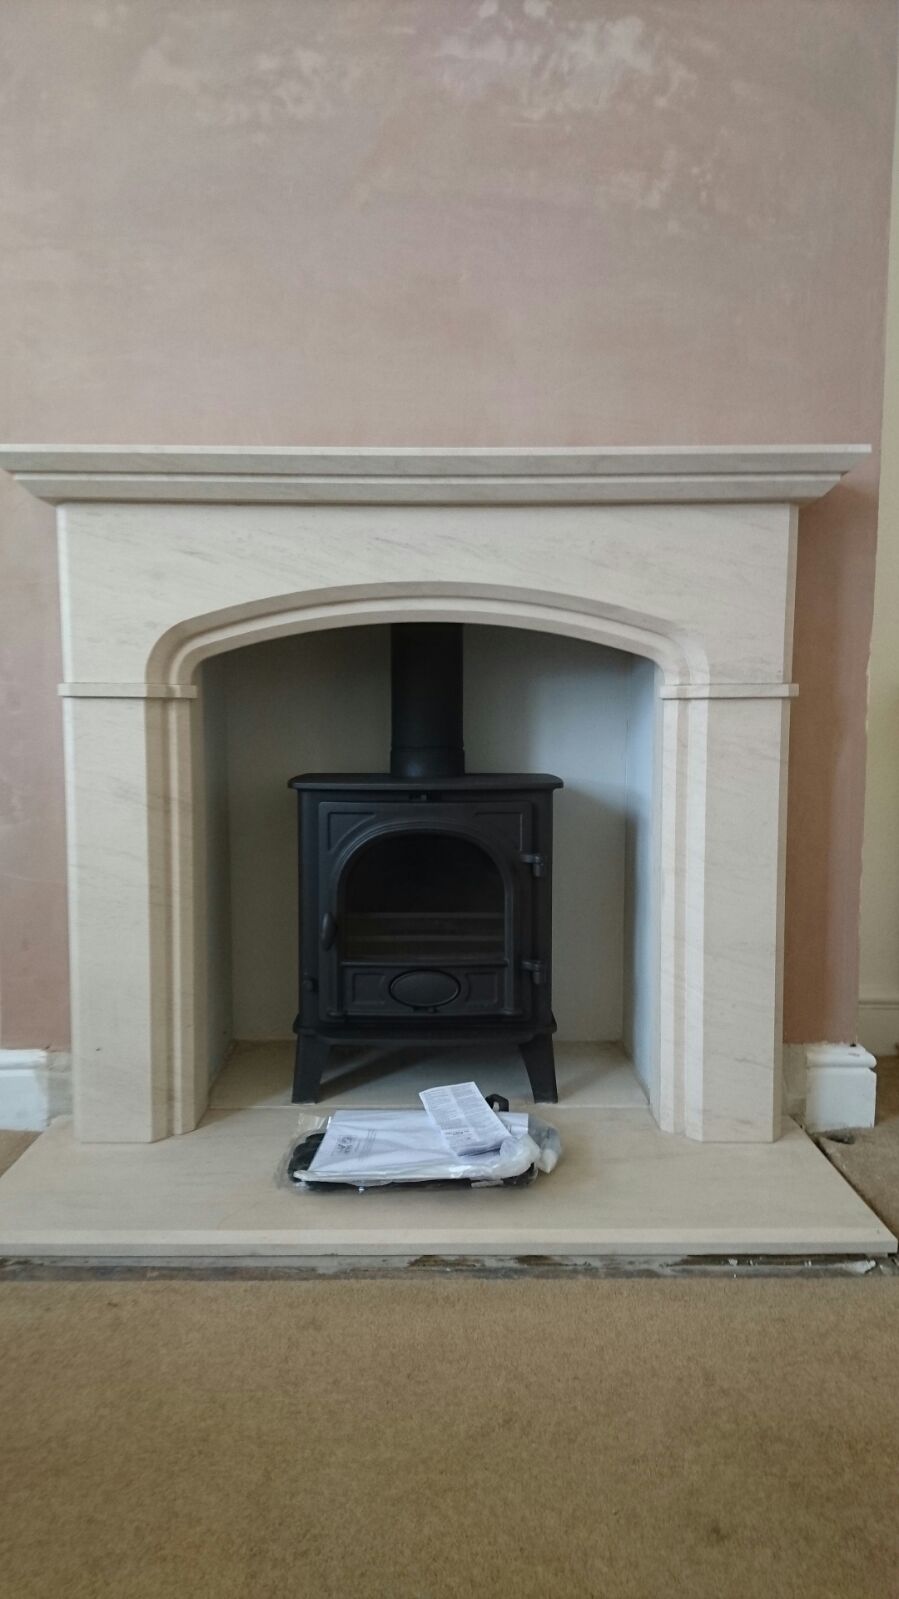 Town House Banbury Fireplace Upgrade